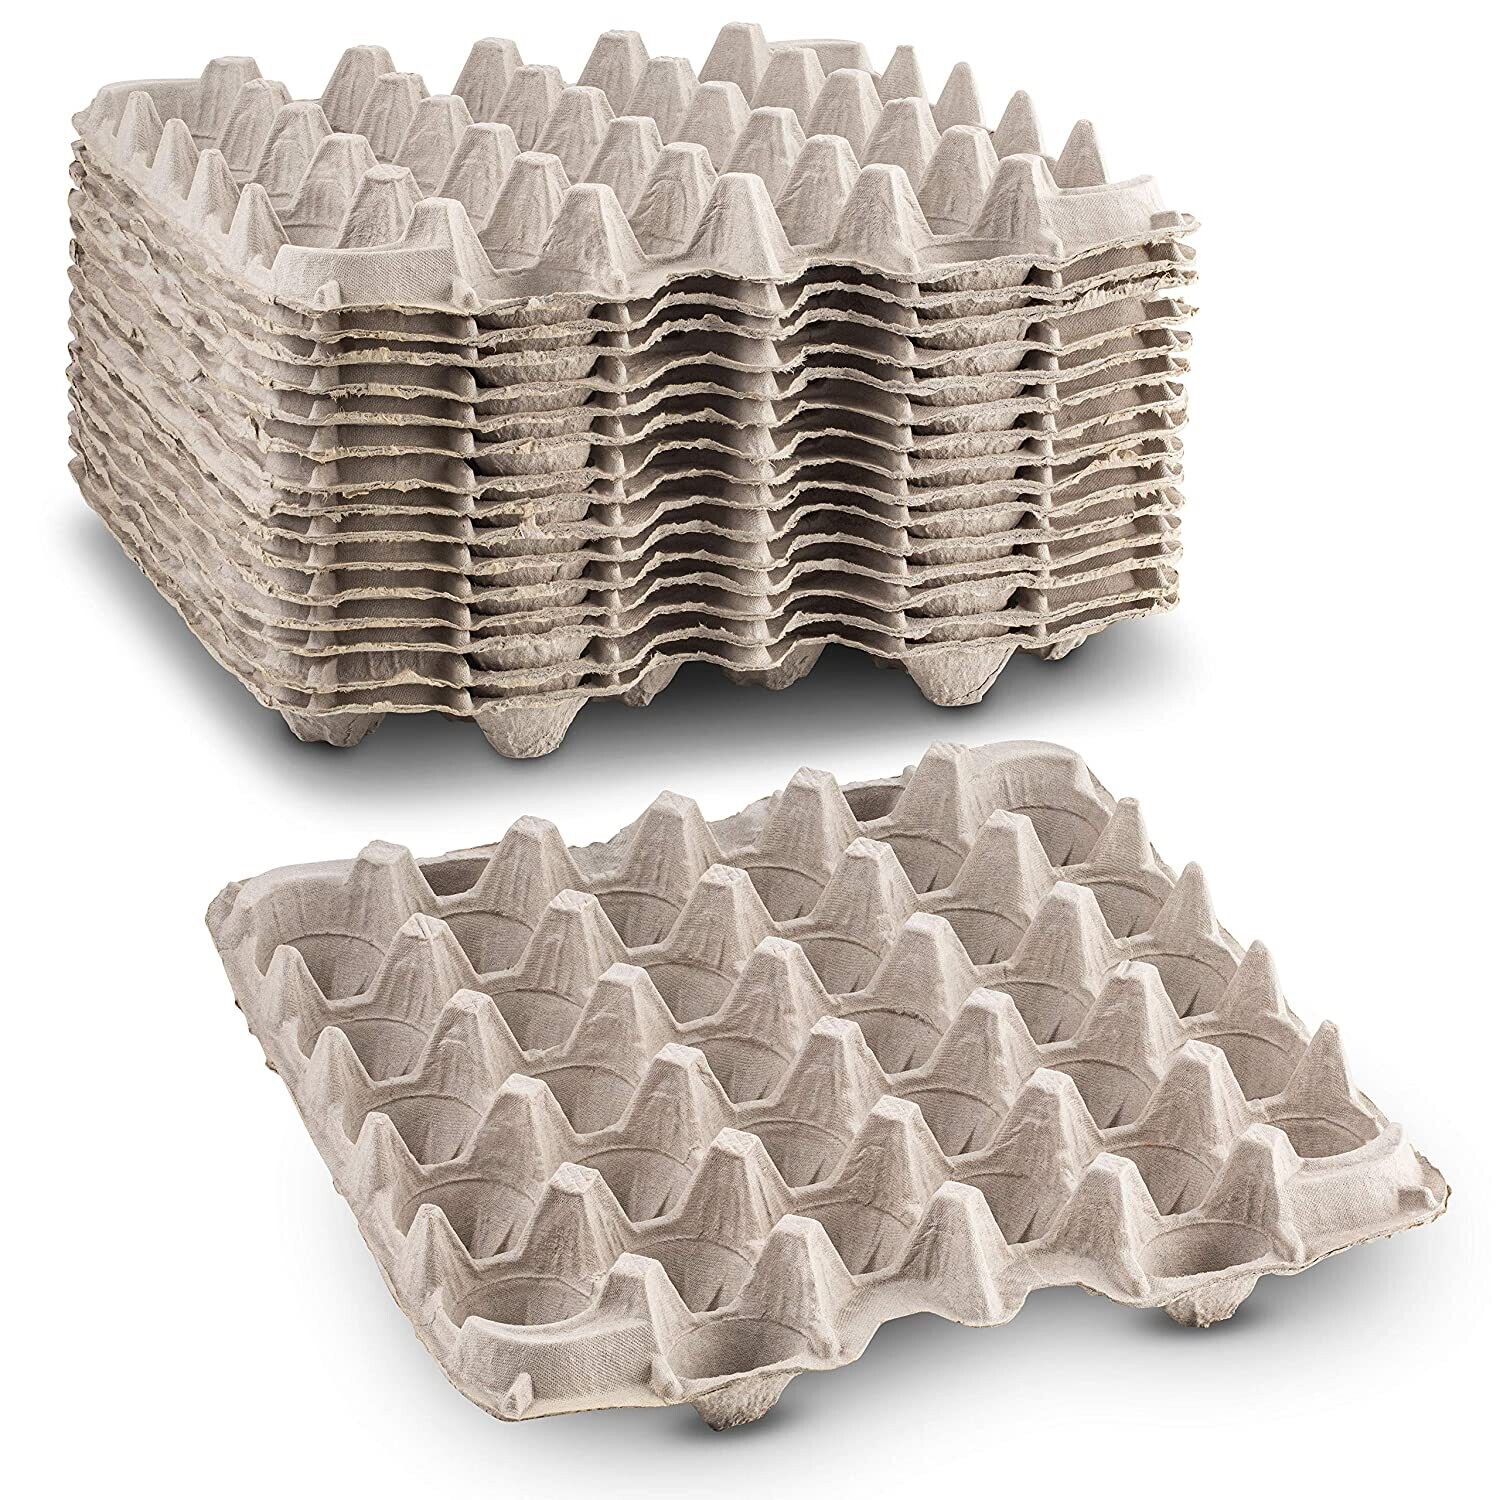 Biodegradable Pulp Fiber Egg Tray Flats for Roach or Cricket Colony [10 PACK]